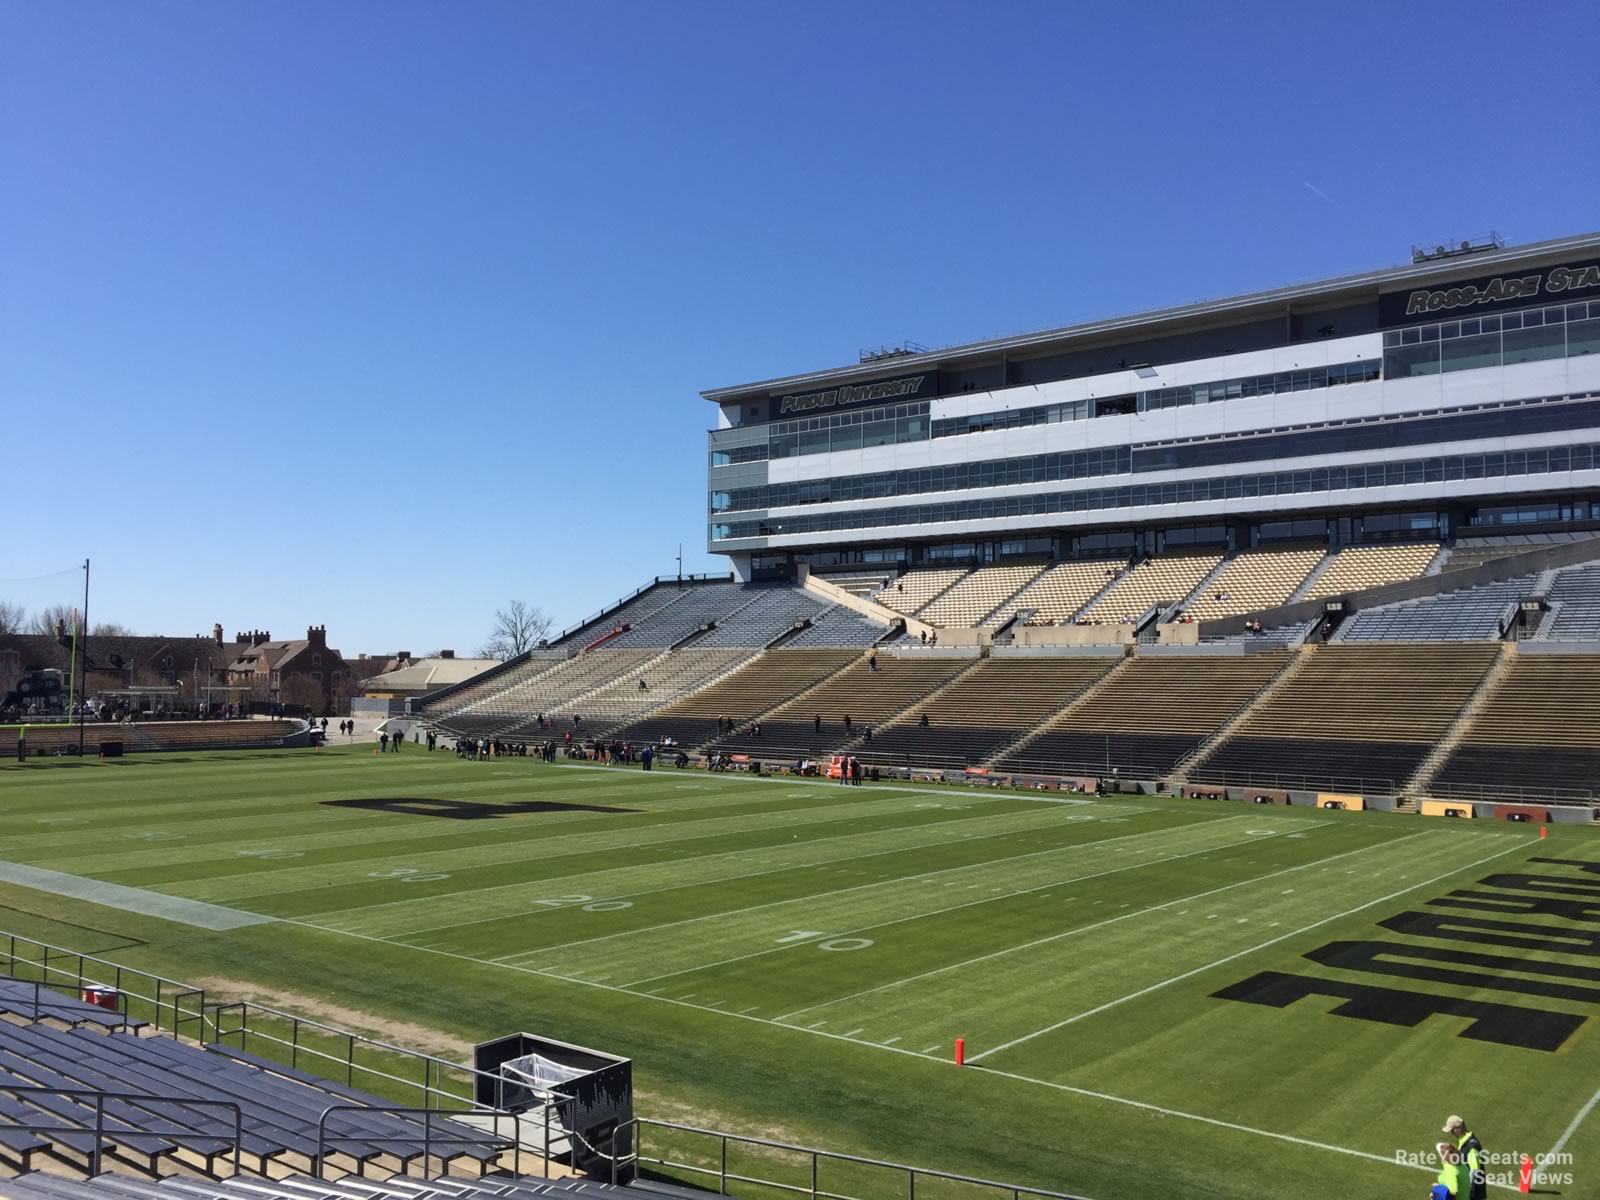 section 110, row 24 seat view  - ross-ade stadium